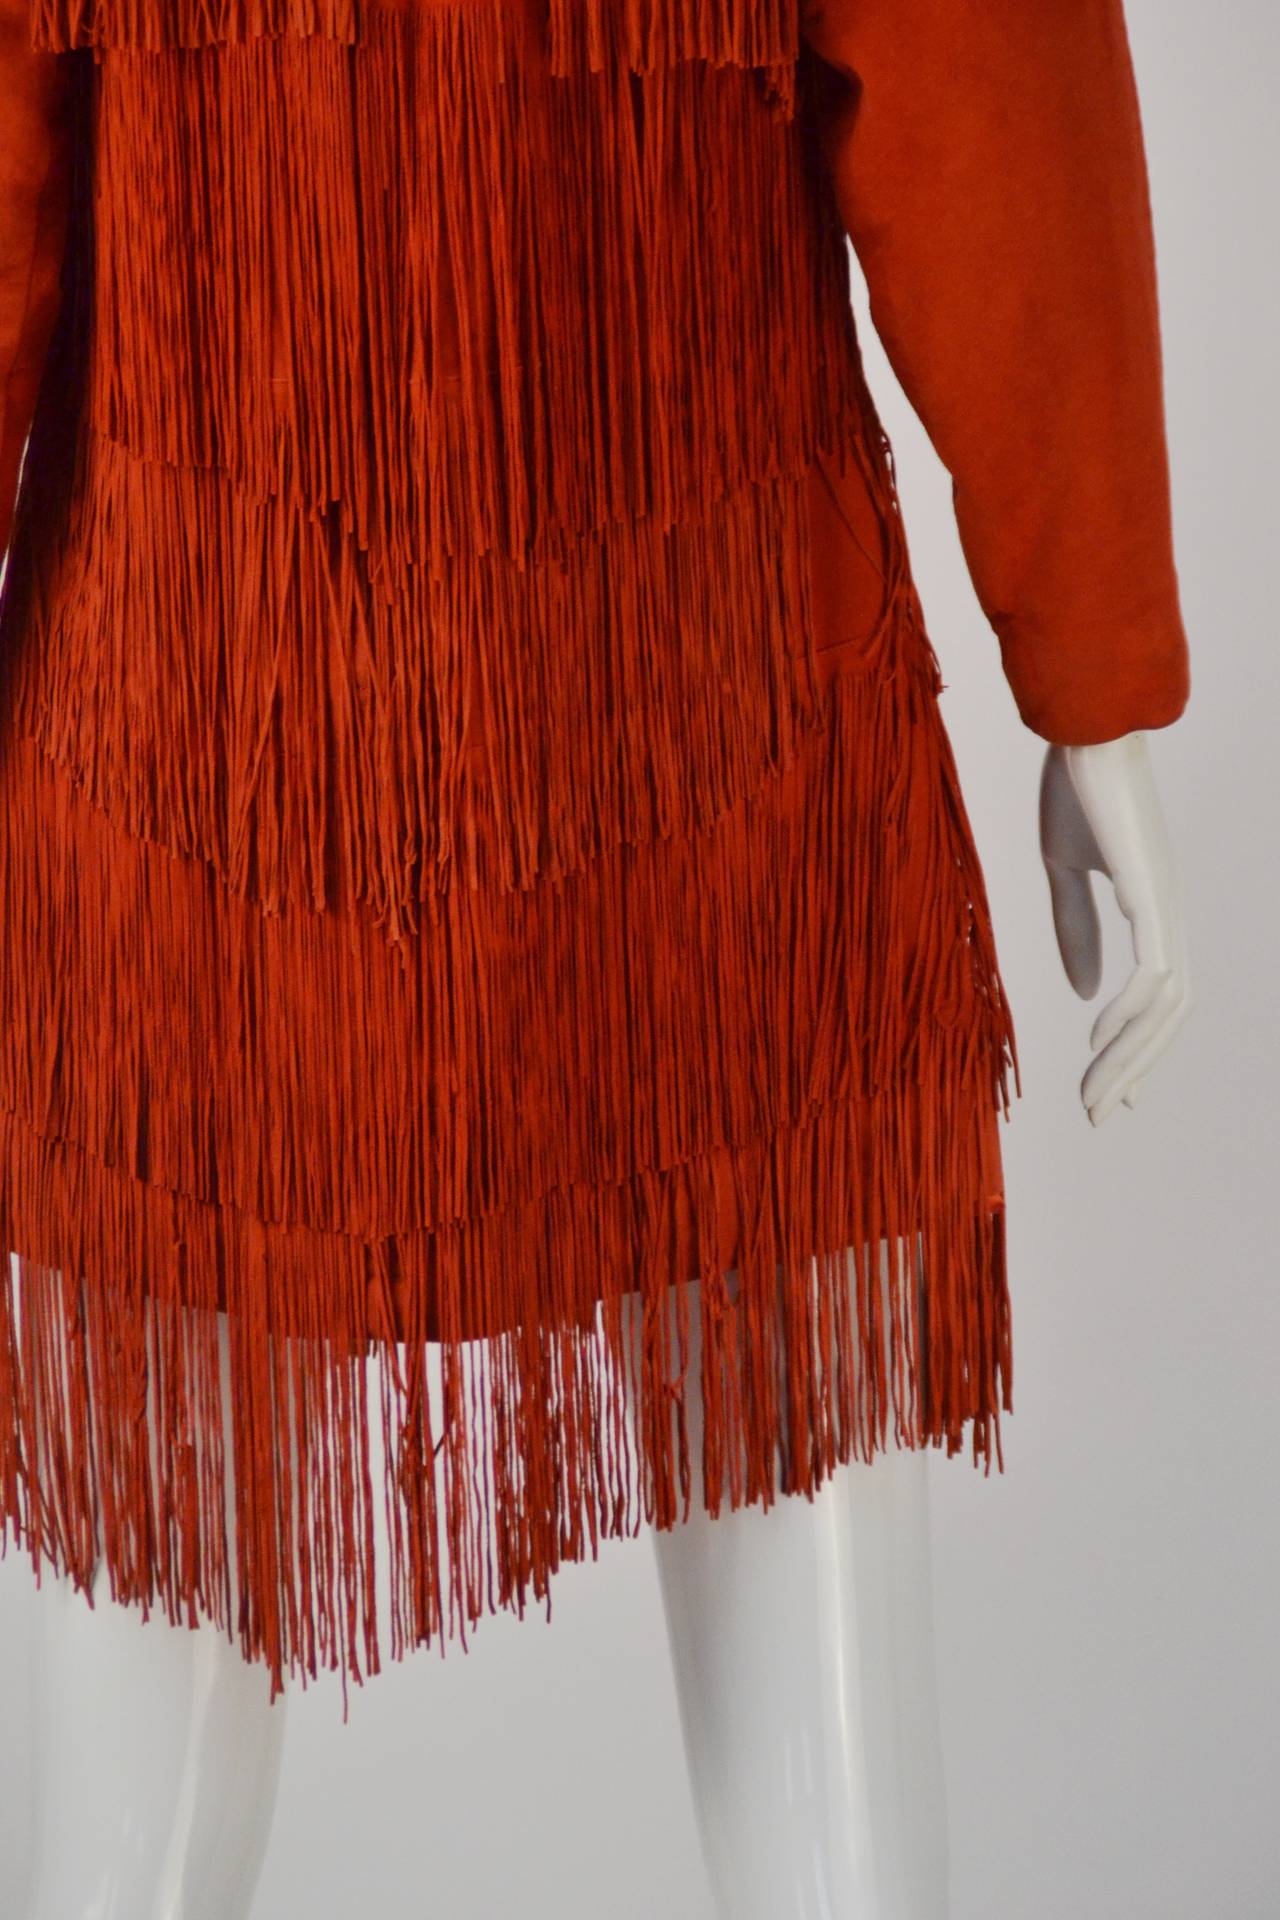 1980s Mario Valentino Leather Red Fringed Dress 1